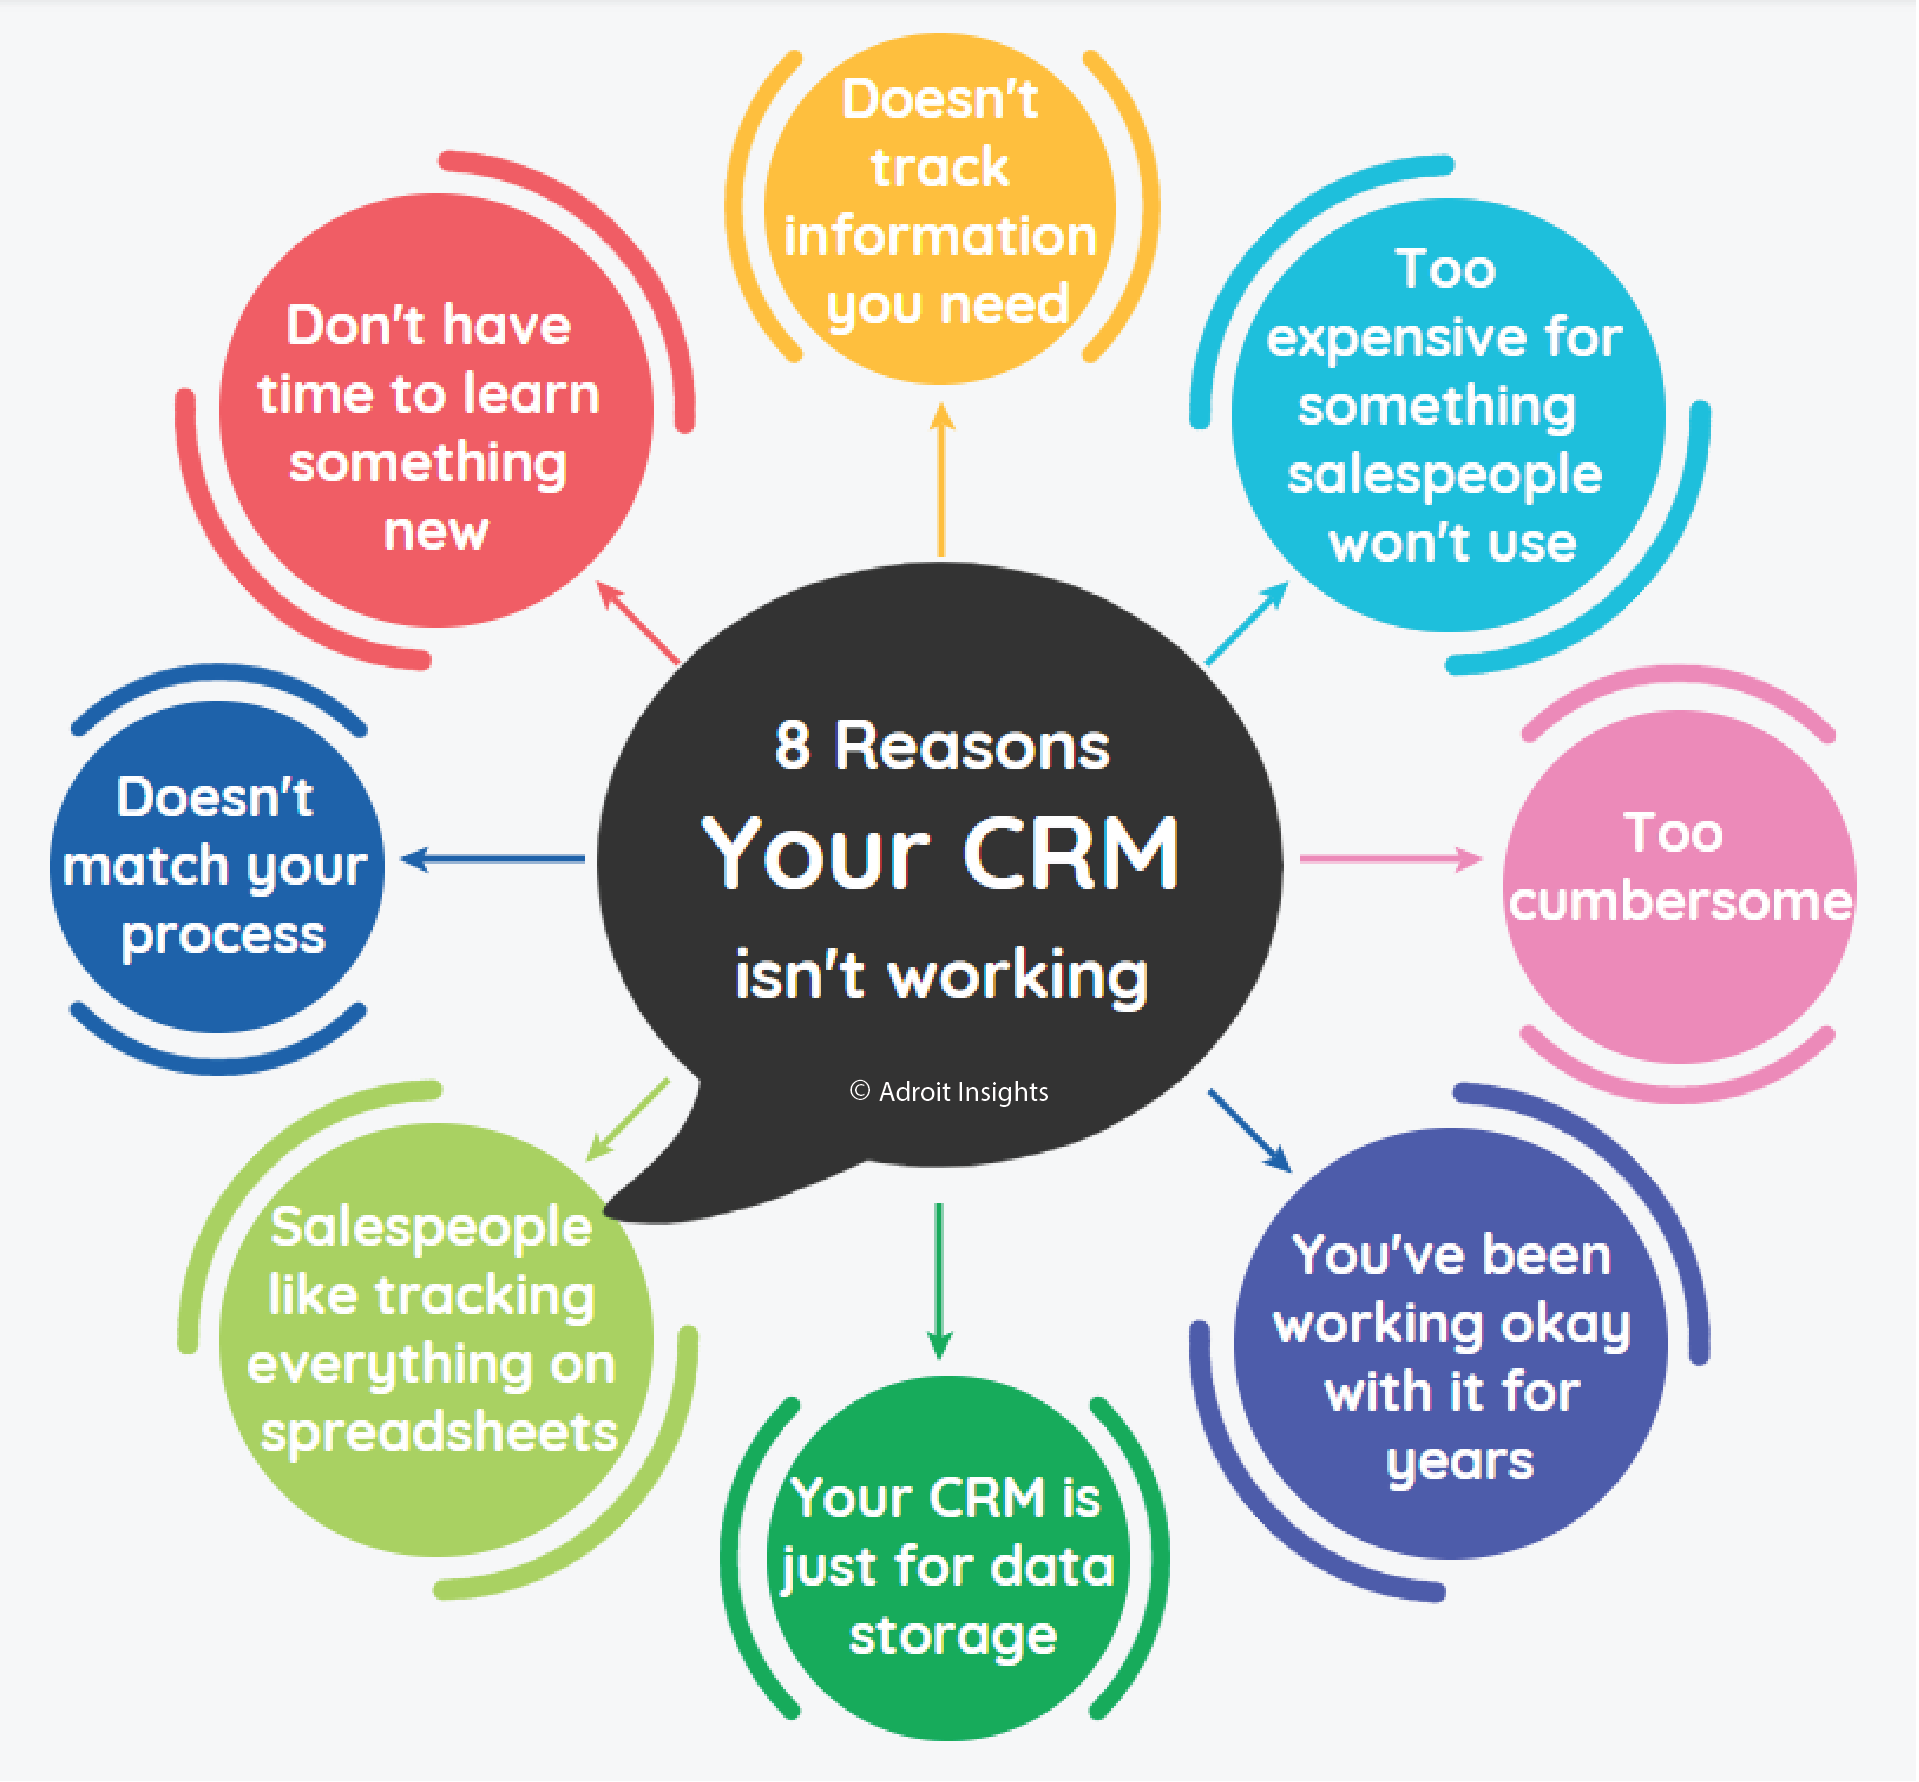 Adroit Insights Infographic - 8 Reasons Your CRM Isn't Working